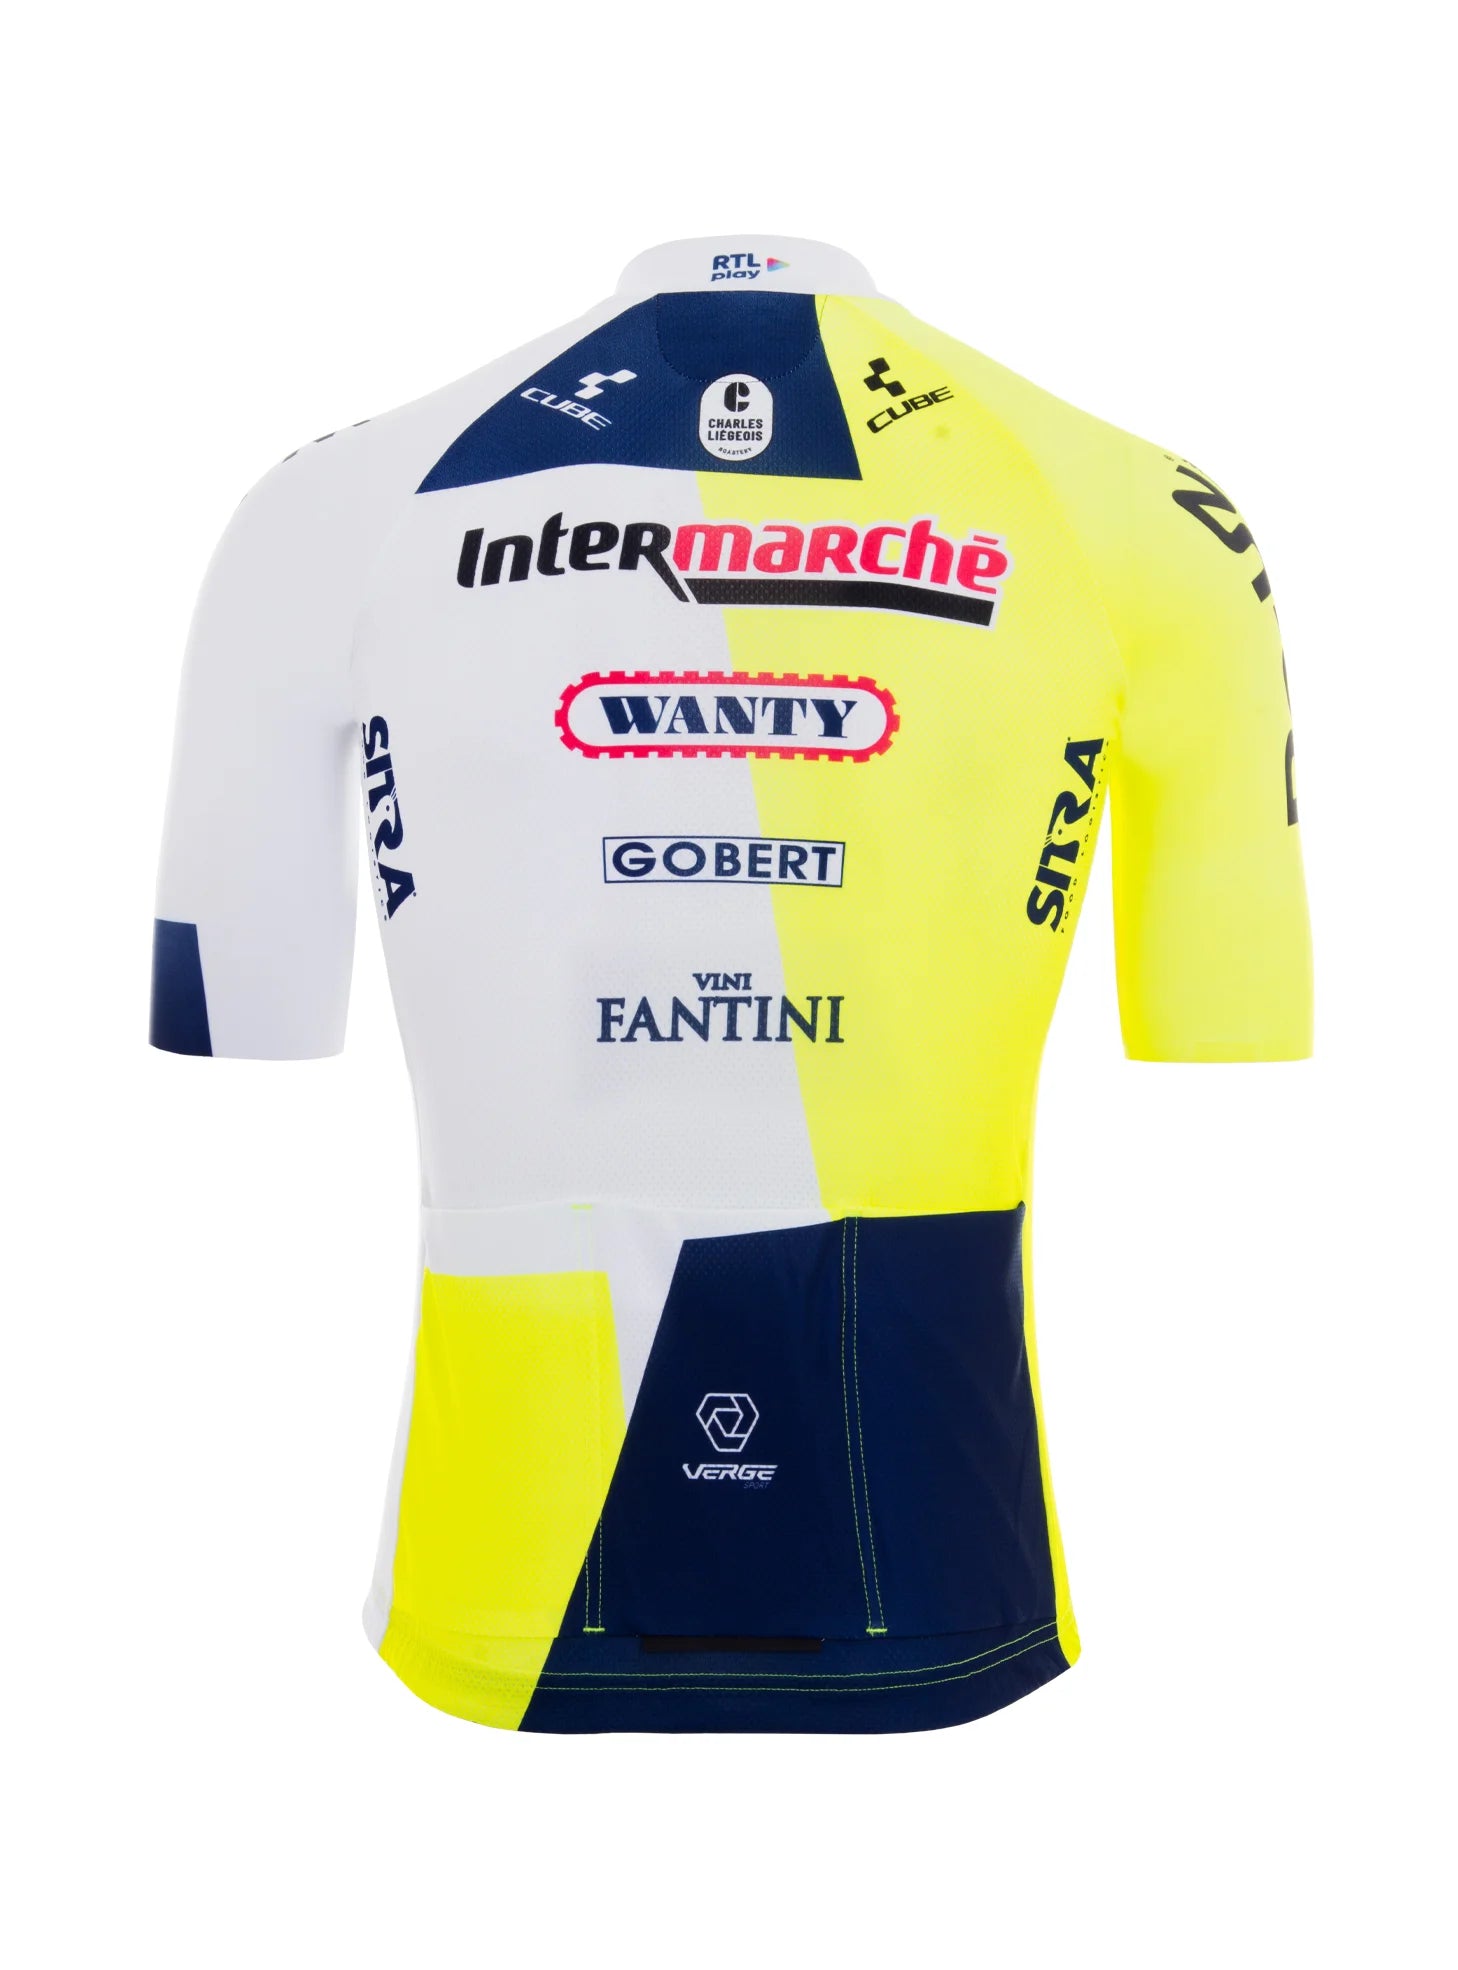 INTERMARCHÉ-WANTY OFFICIAL TEAM STRIKE 4.0 JERSEY